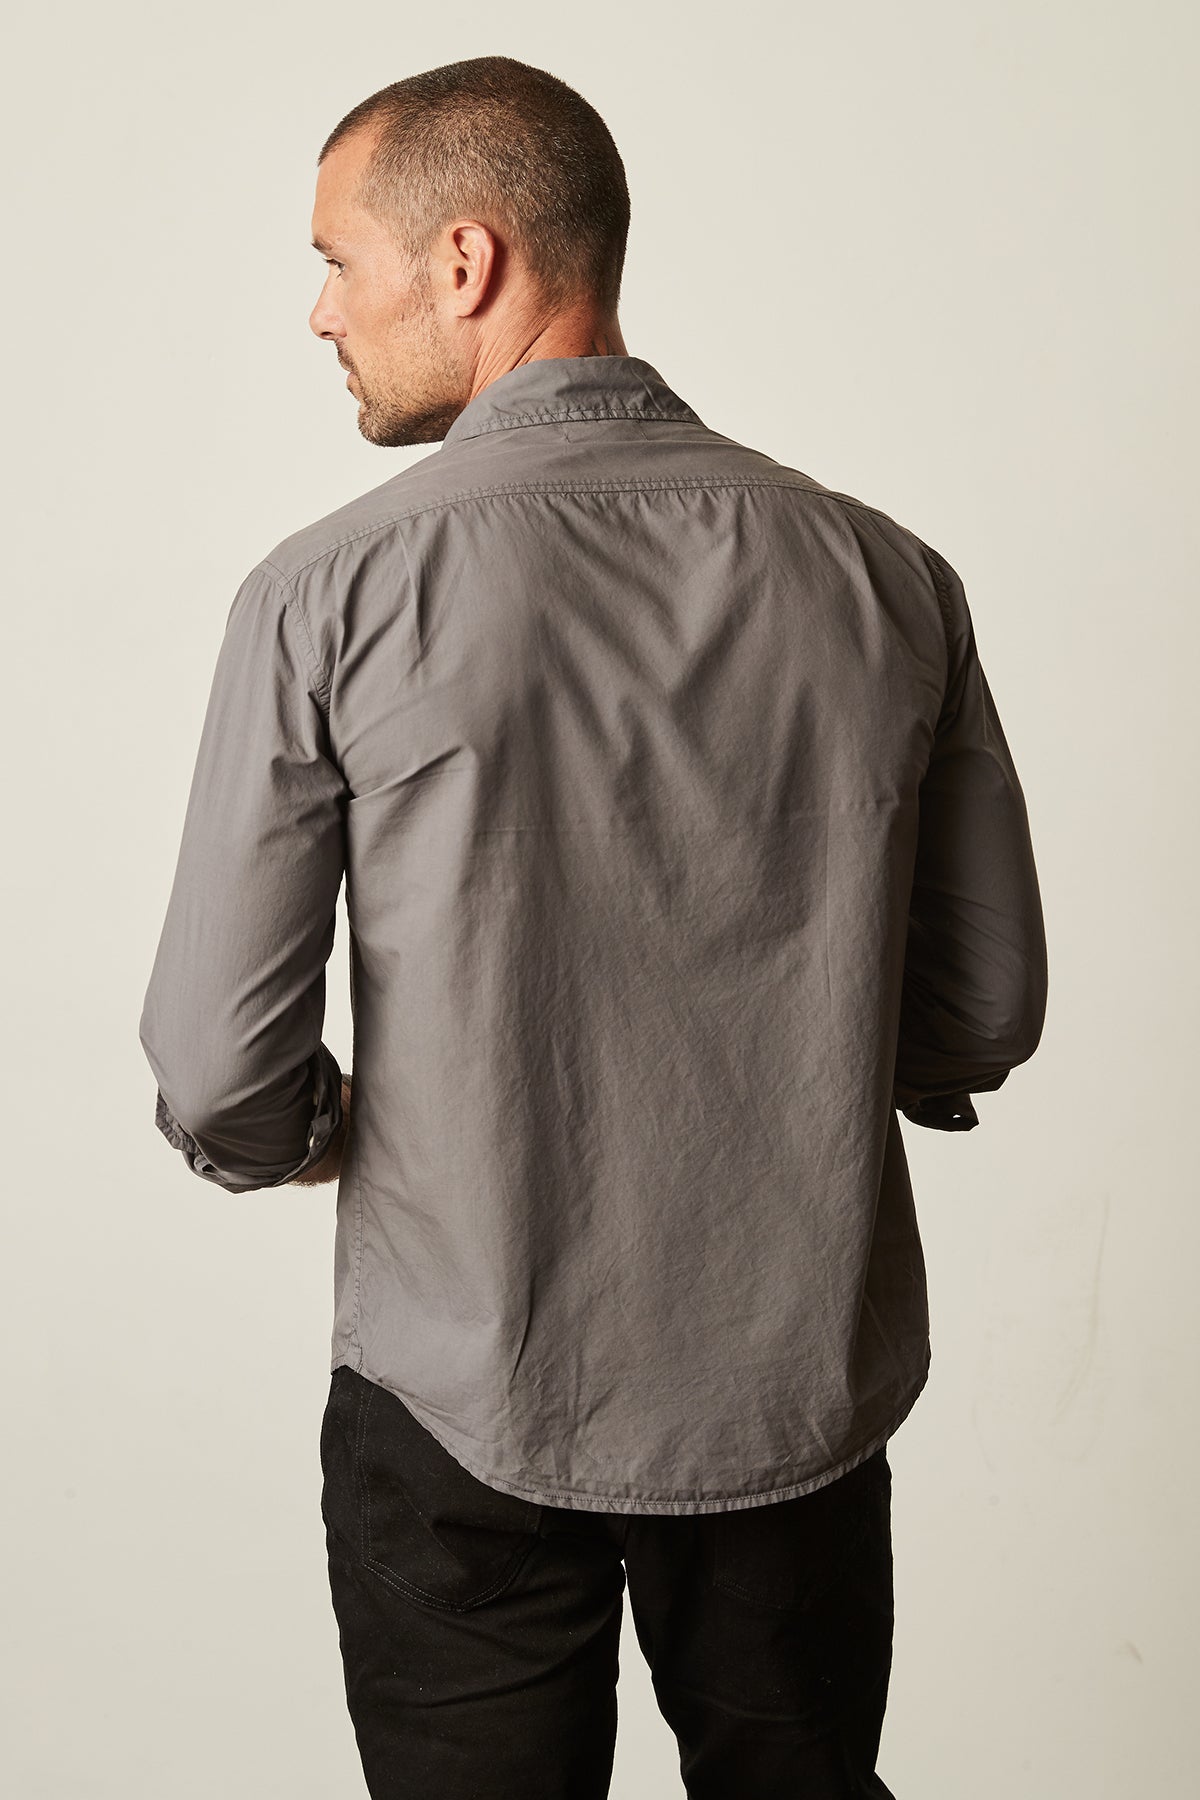 Brooks button up woven shirt in carbon back-24983593222337